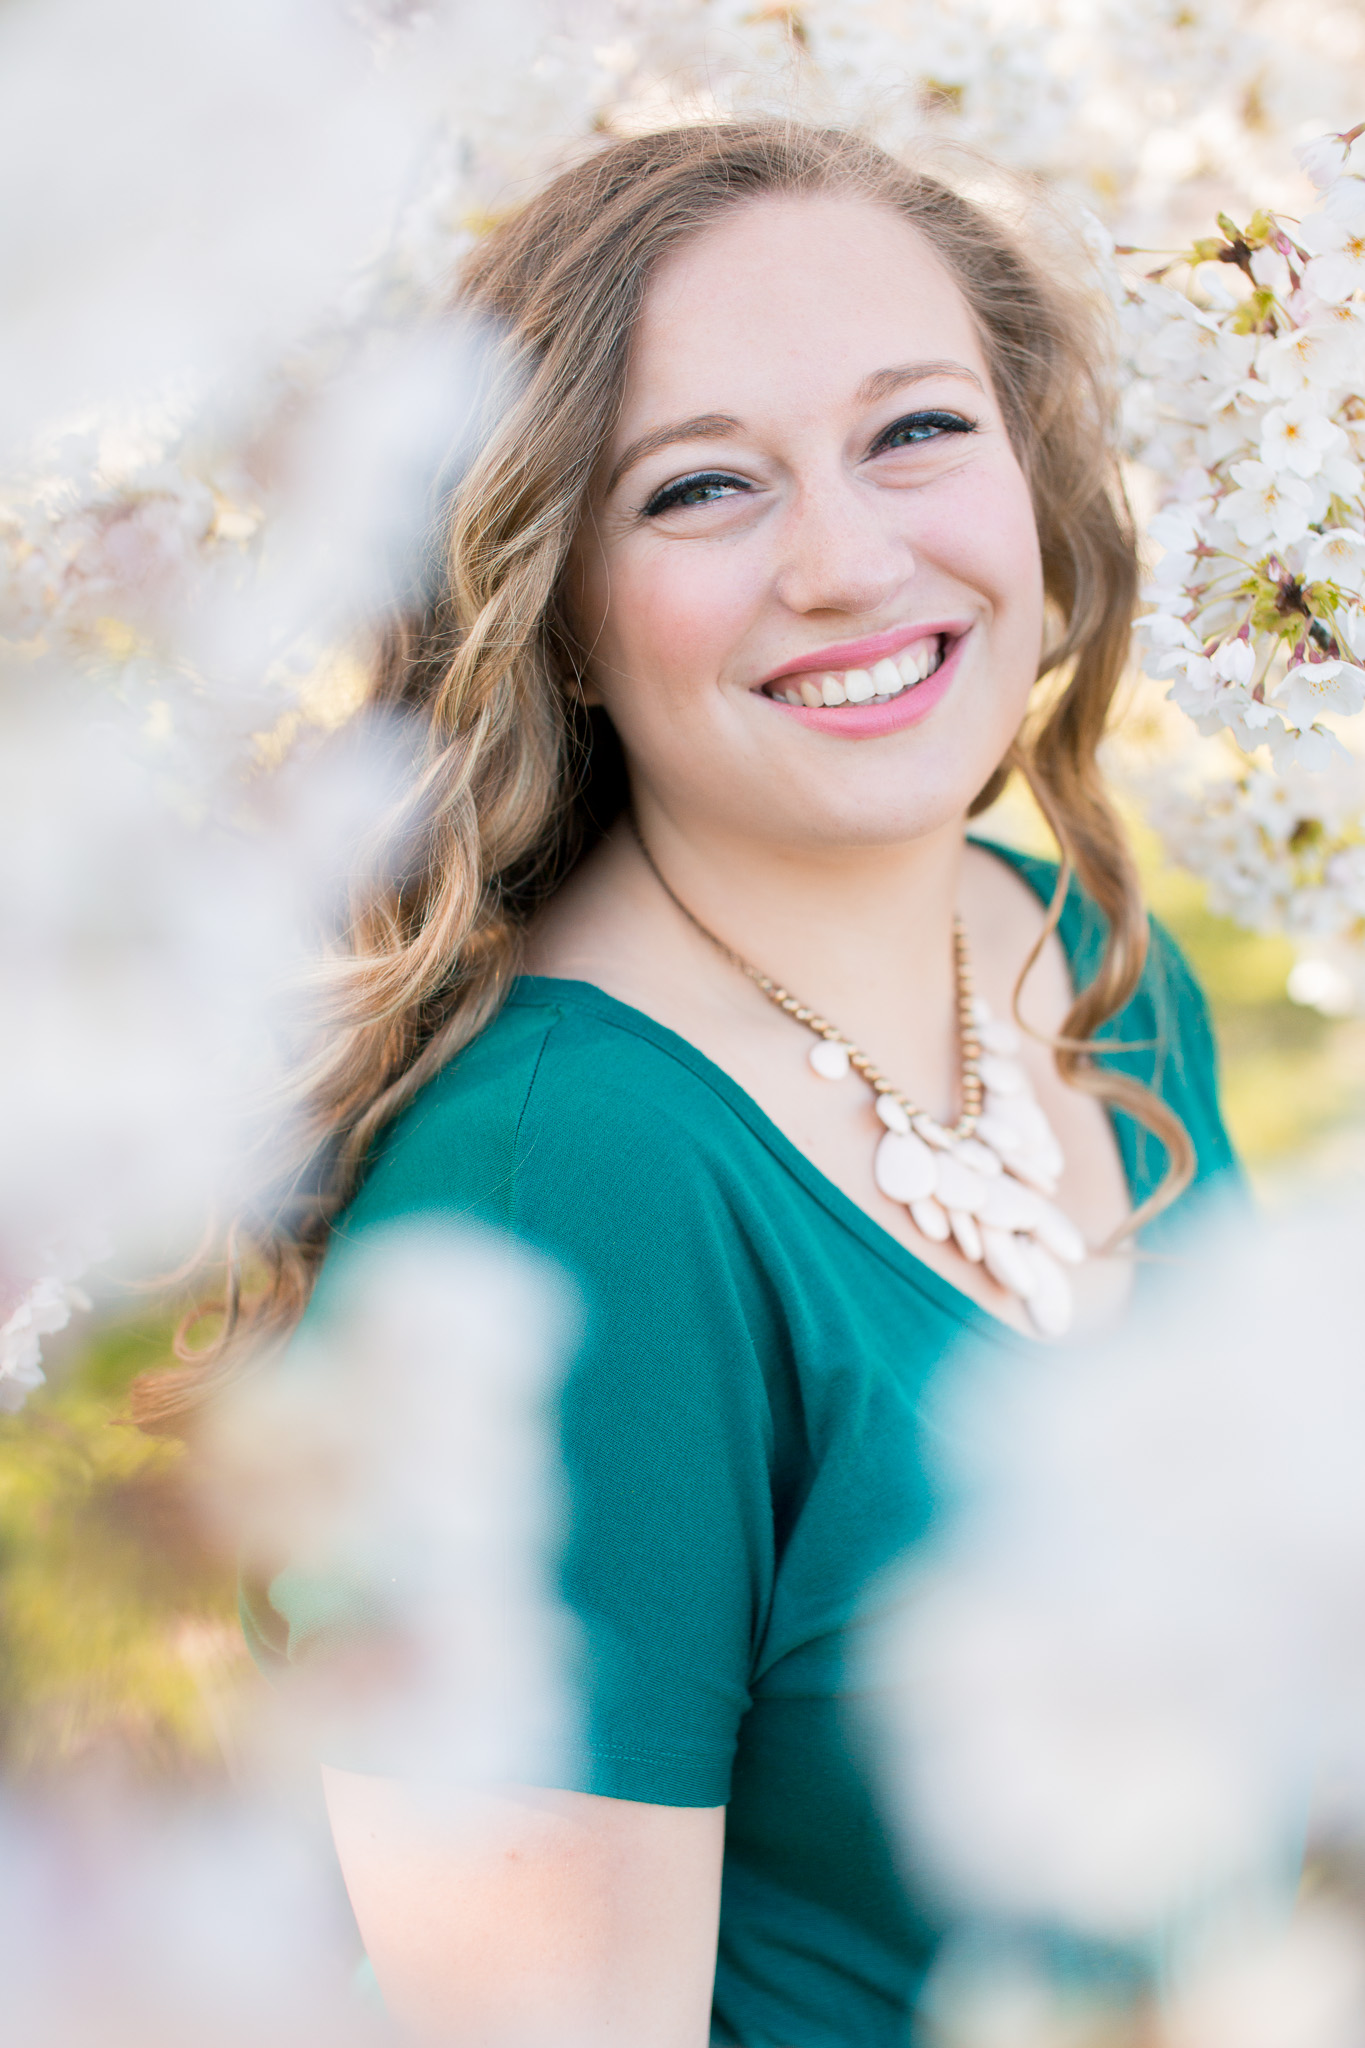  Deanne Ratzlaff, Spring Sessions, Chilliwack Portrait Photography, Fraser Valley Photography, British Columbia Photography, Canadian Creative, Stephanie Lauren Photography, SLPHOTO, 2016. 